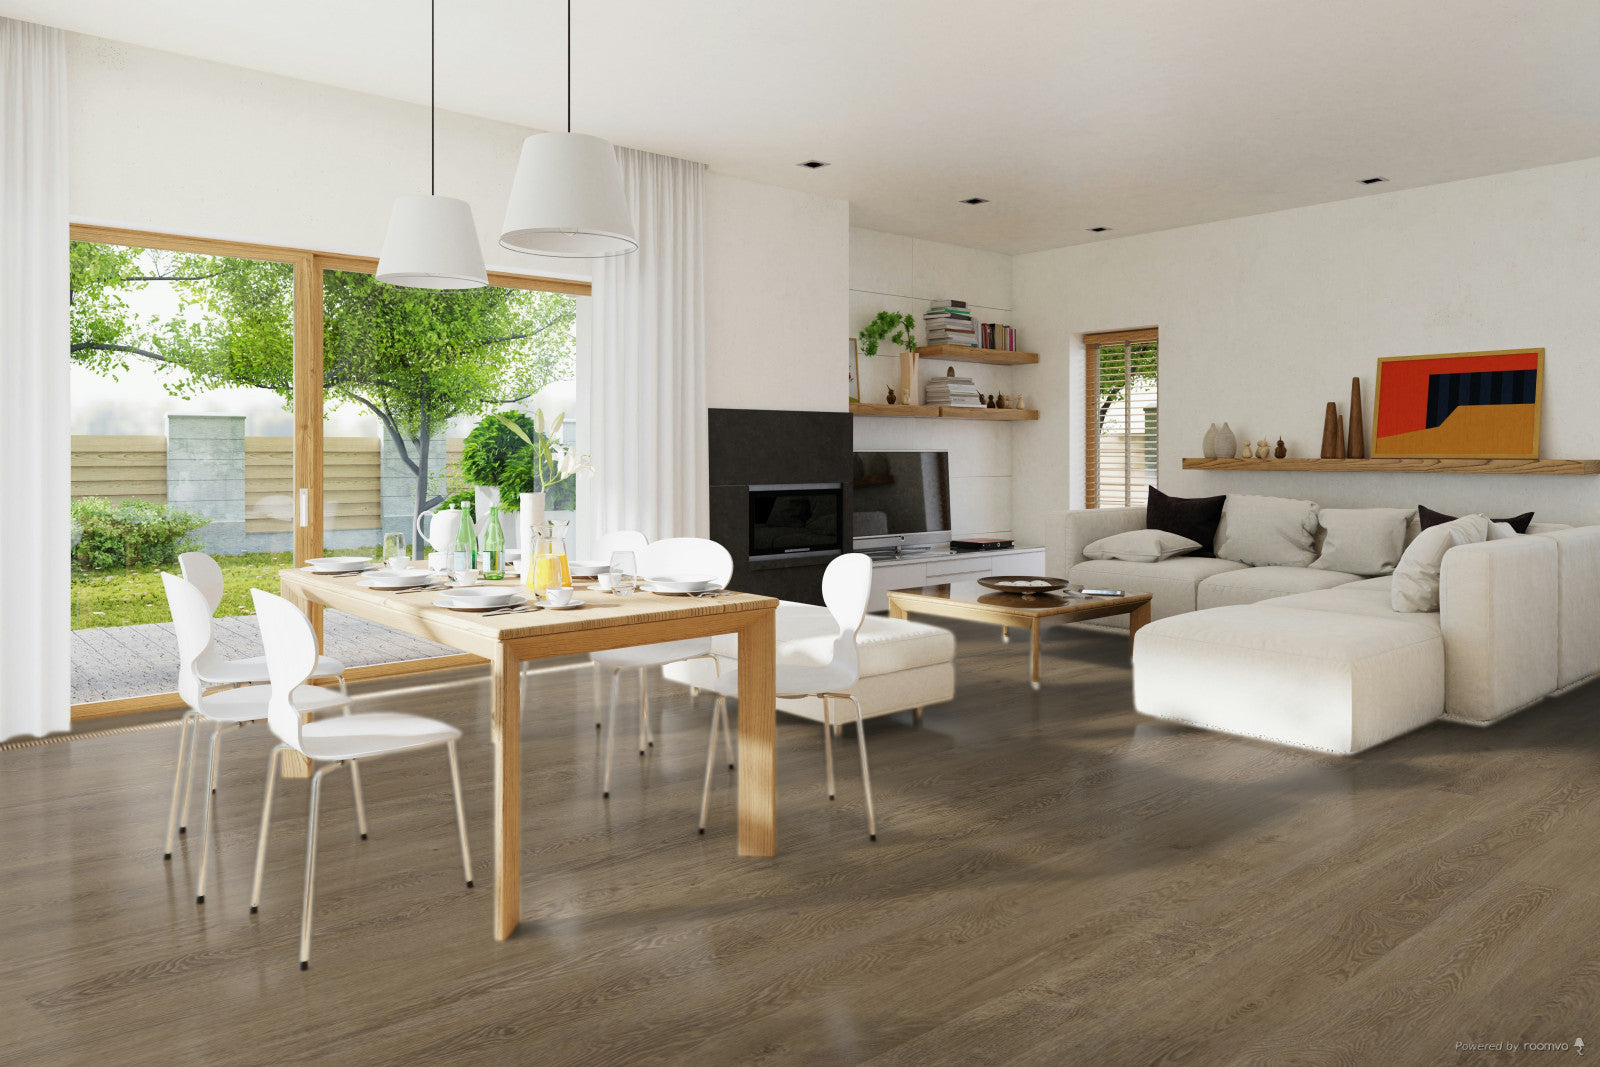 Engineered Floors - Atmosphere Collection - 7 in. x 48 in. - Astro